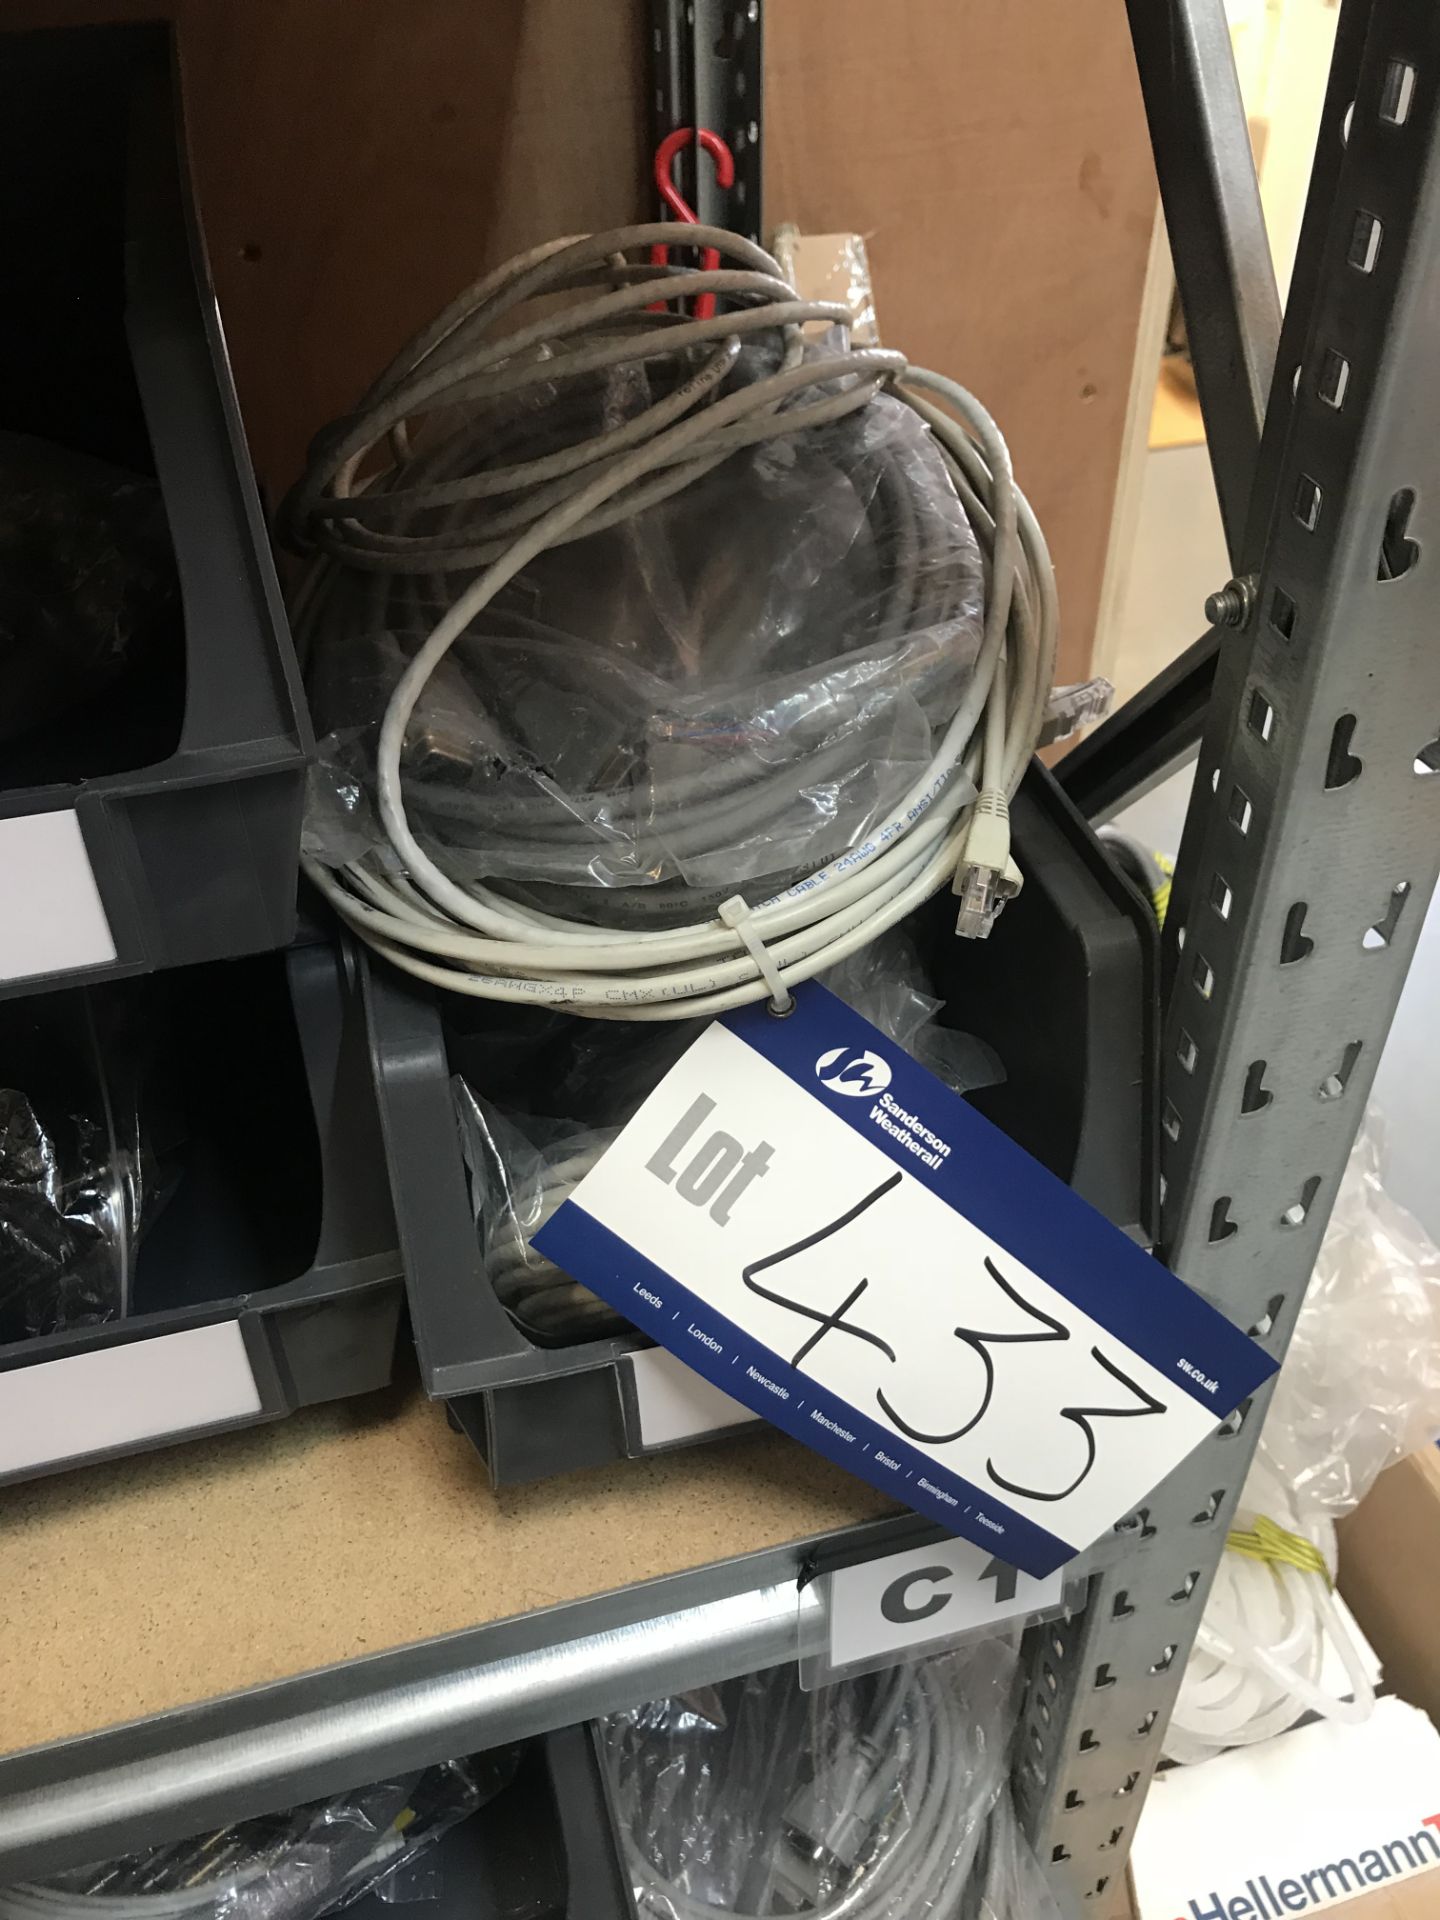 Quantity of CAT5 and CAT6 Ethernet Cable